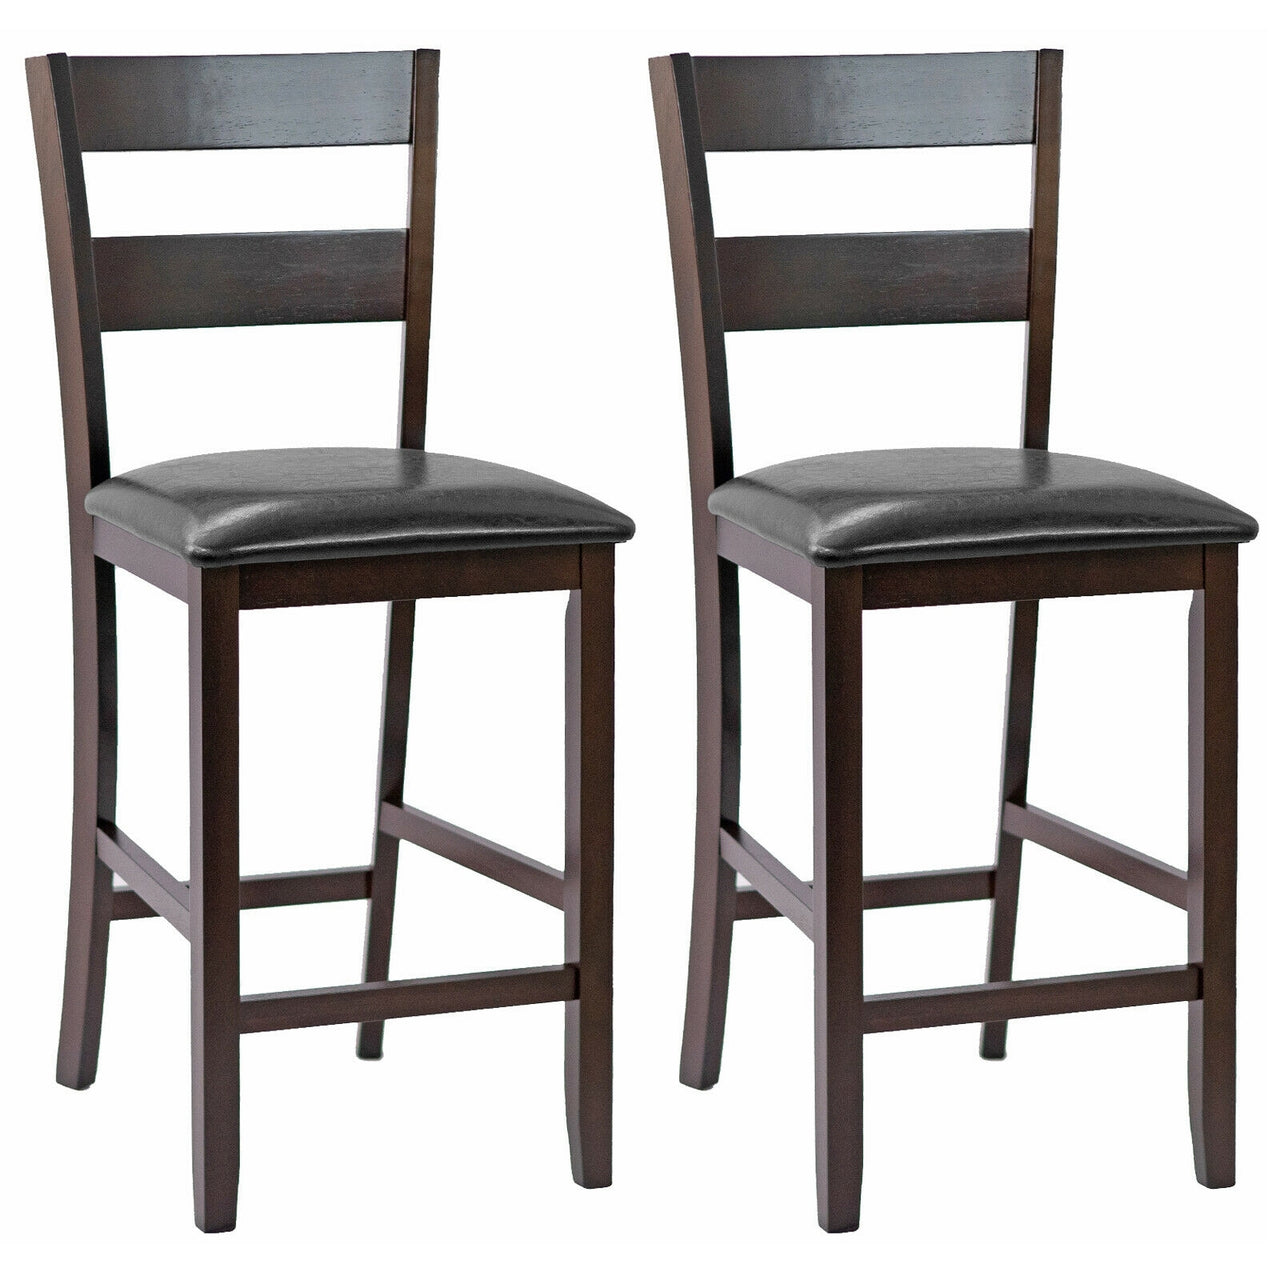 2-Pieces Upholstered Bar Stools Counter Height Chairs with PU Leather Cover - Gallery View 3 of 9